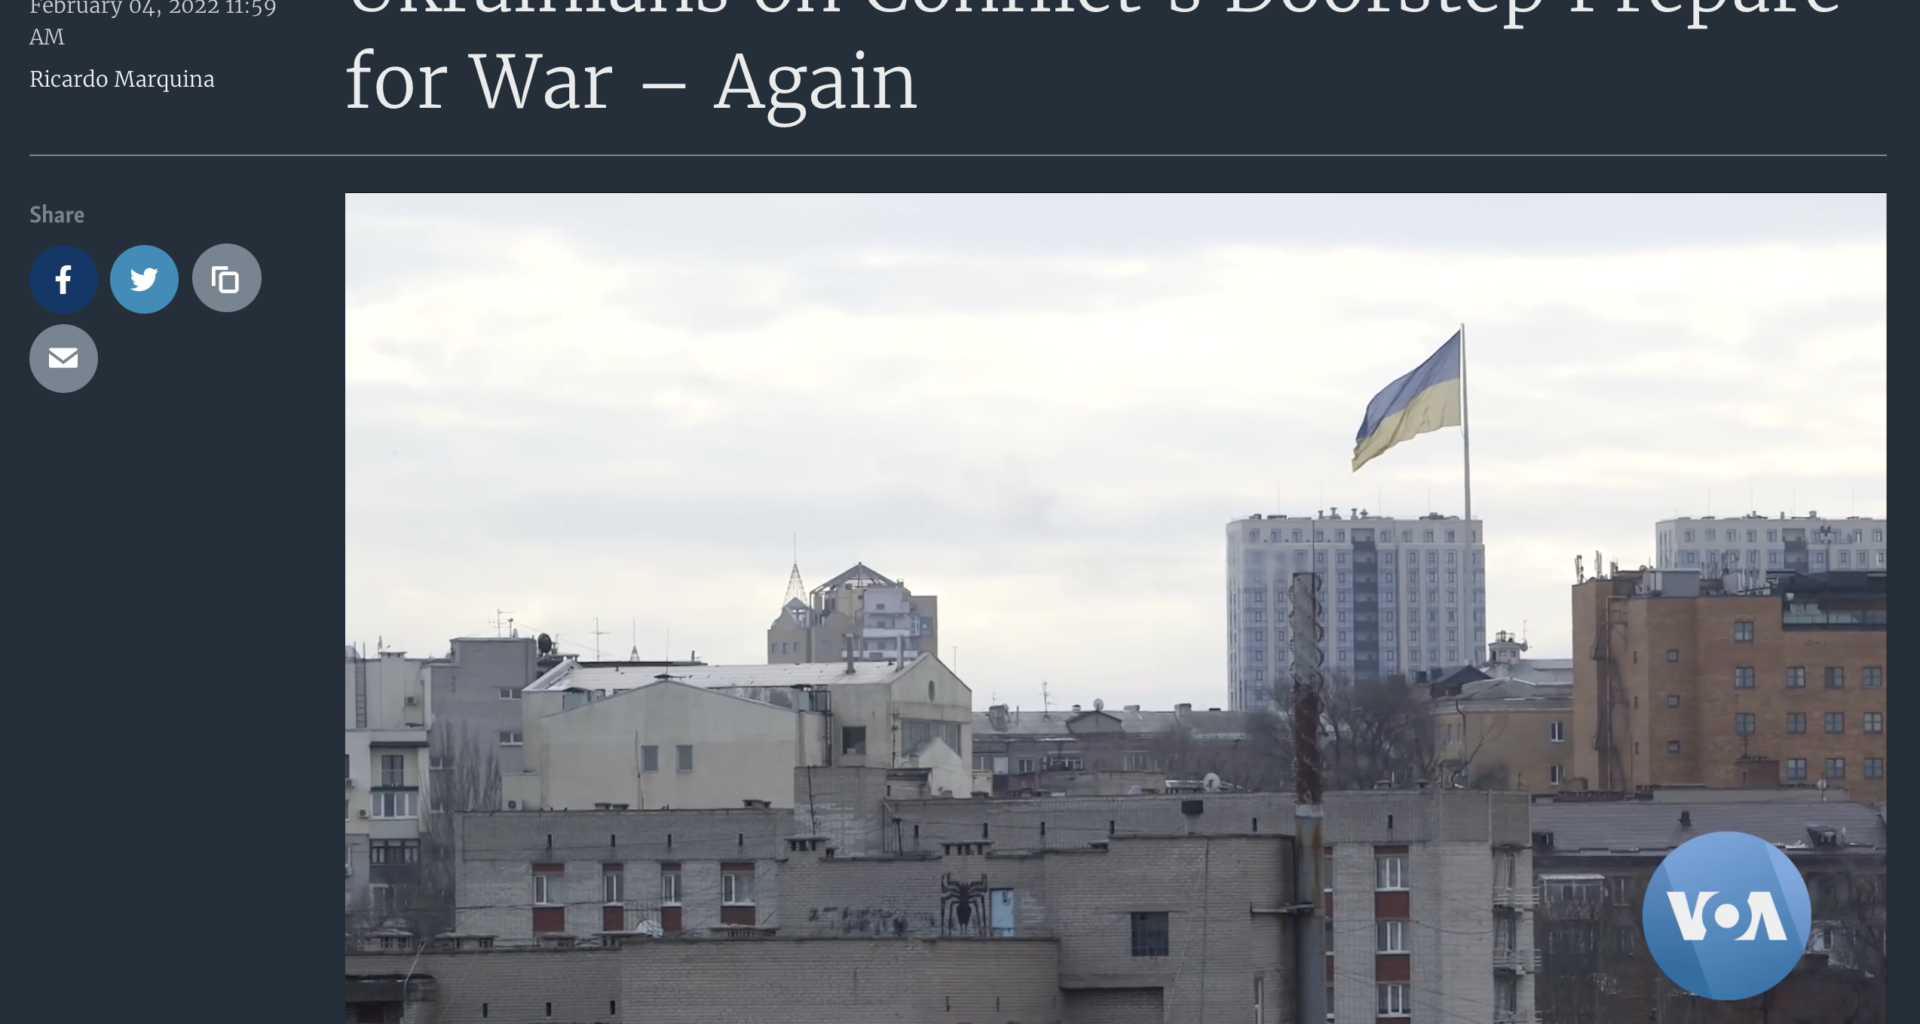 "Ukrainians on Conflicts... ,"VOA Video Report by Ricardo Marquina and Pablo Gonzalez, February 04, 2022.